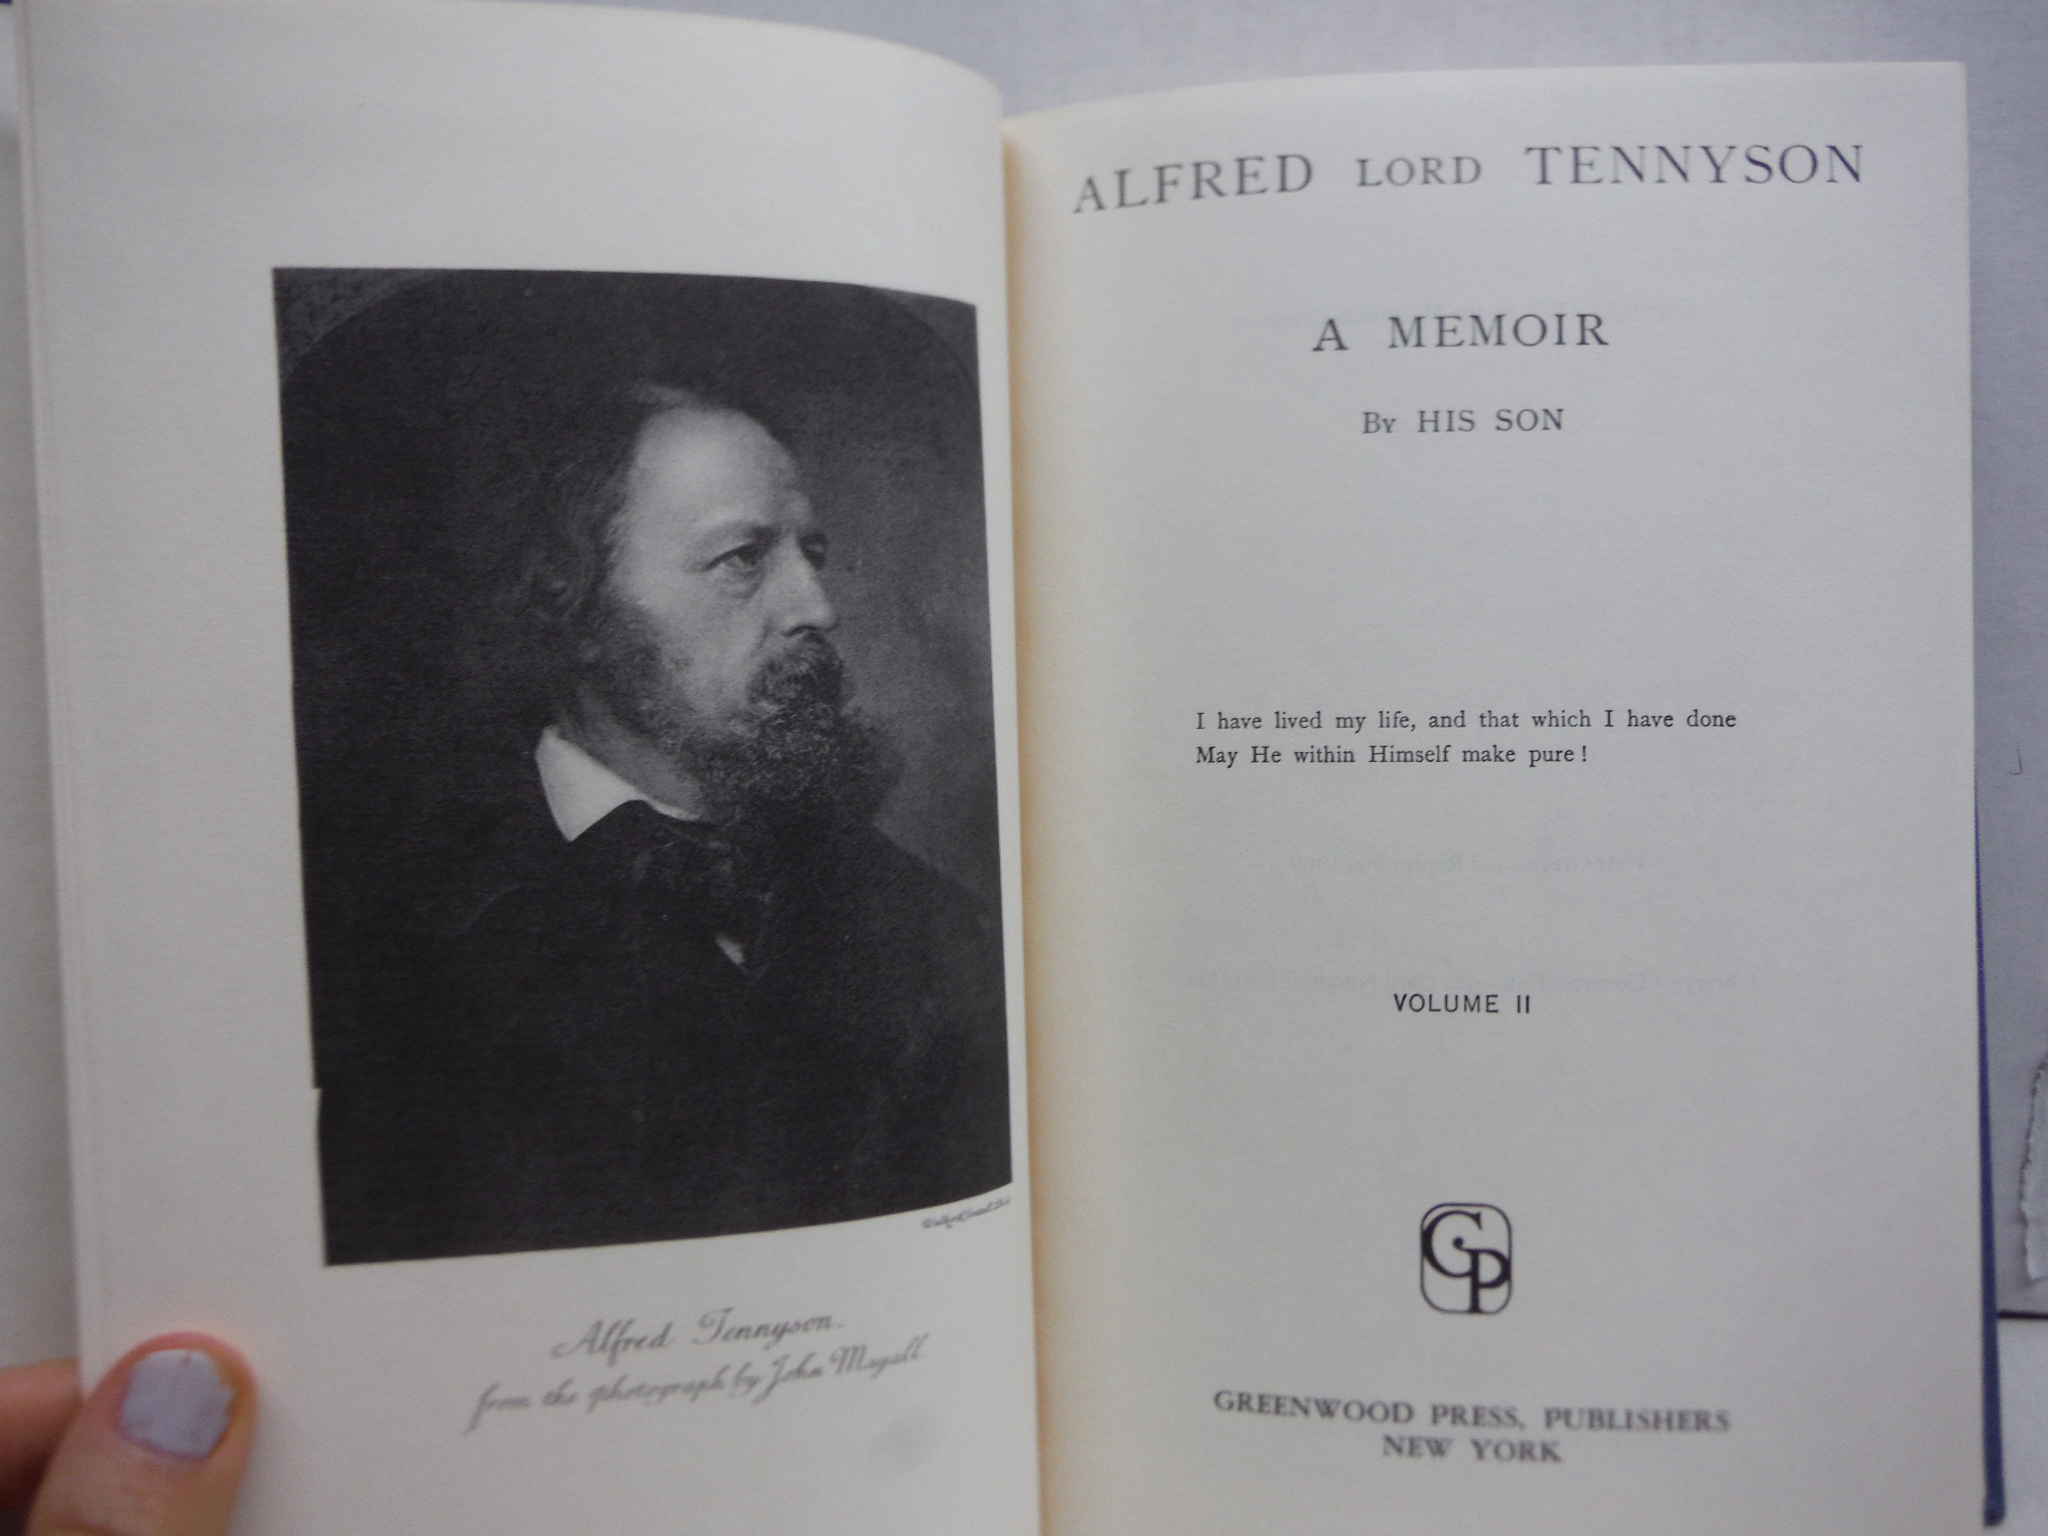 Image 2 of Alfred Lord Tennyson: A Memoir by His Son, Vols. I & II